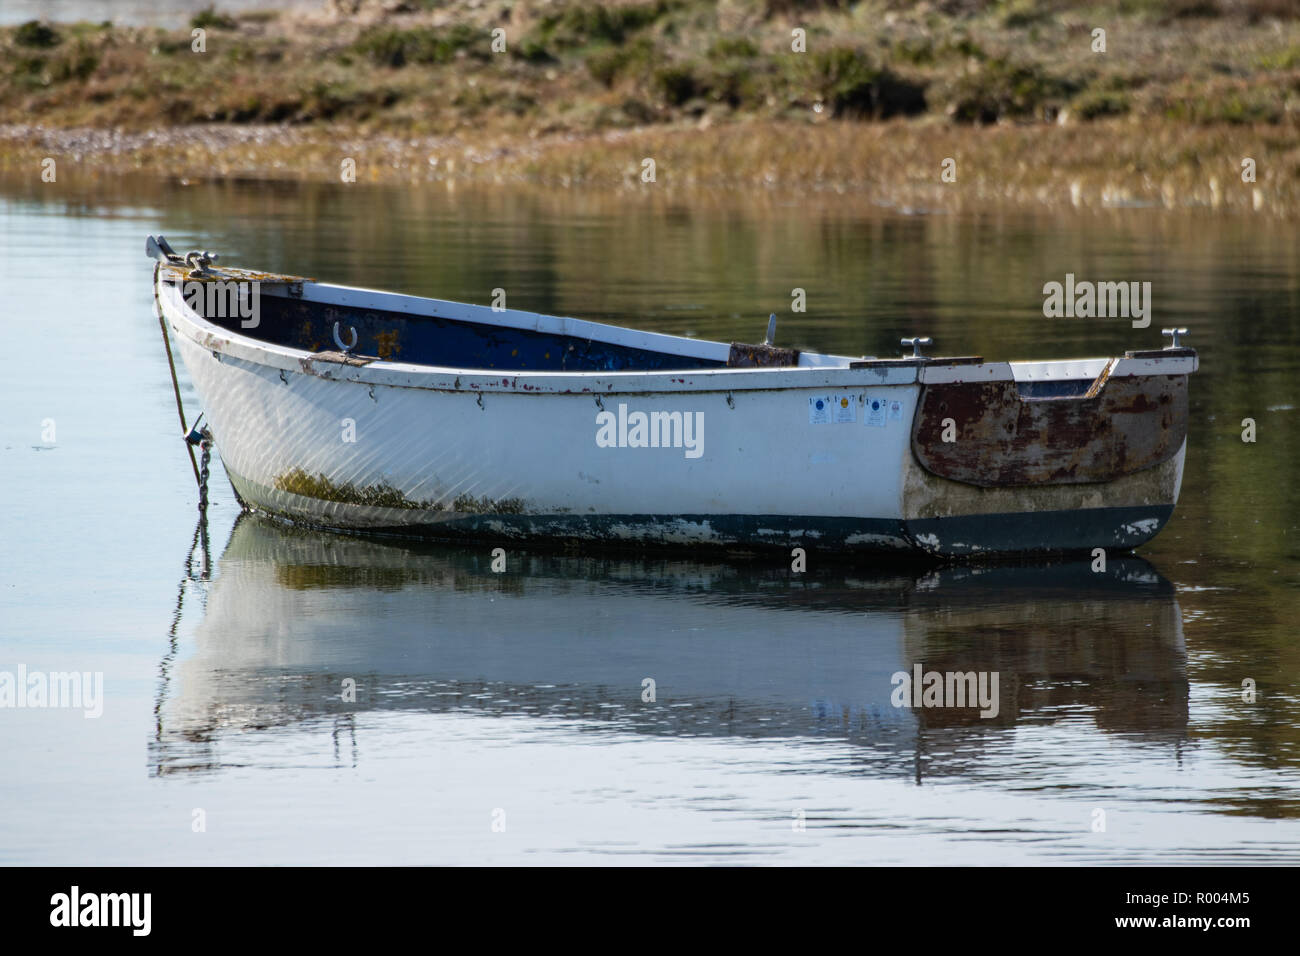 A Single old wooden boat reflecting on very calm waters Stock Photo